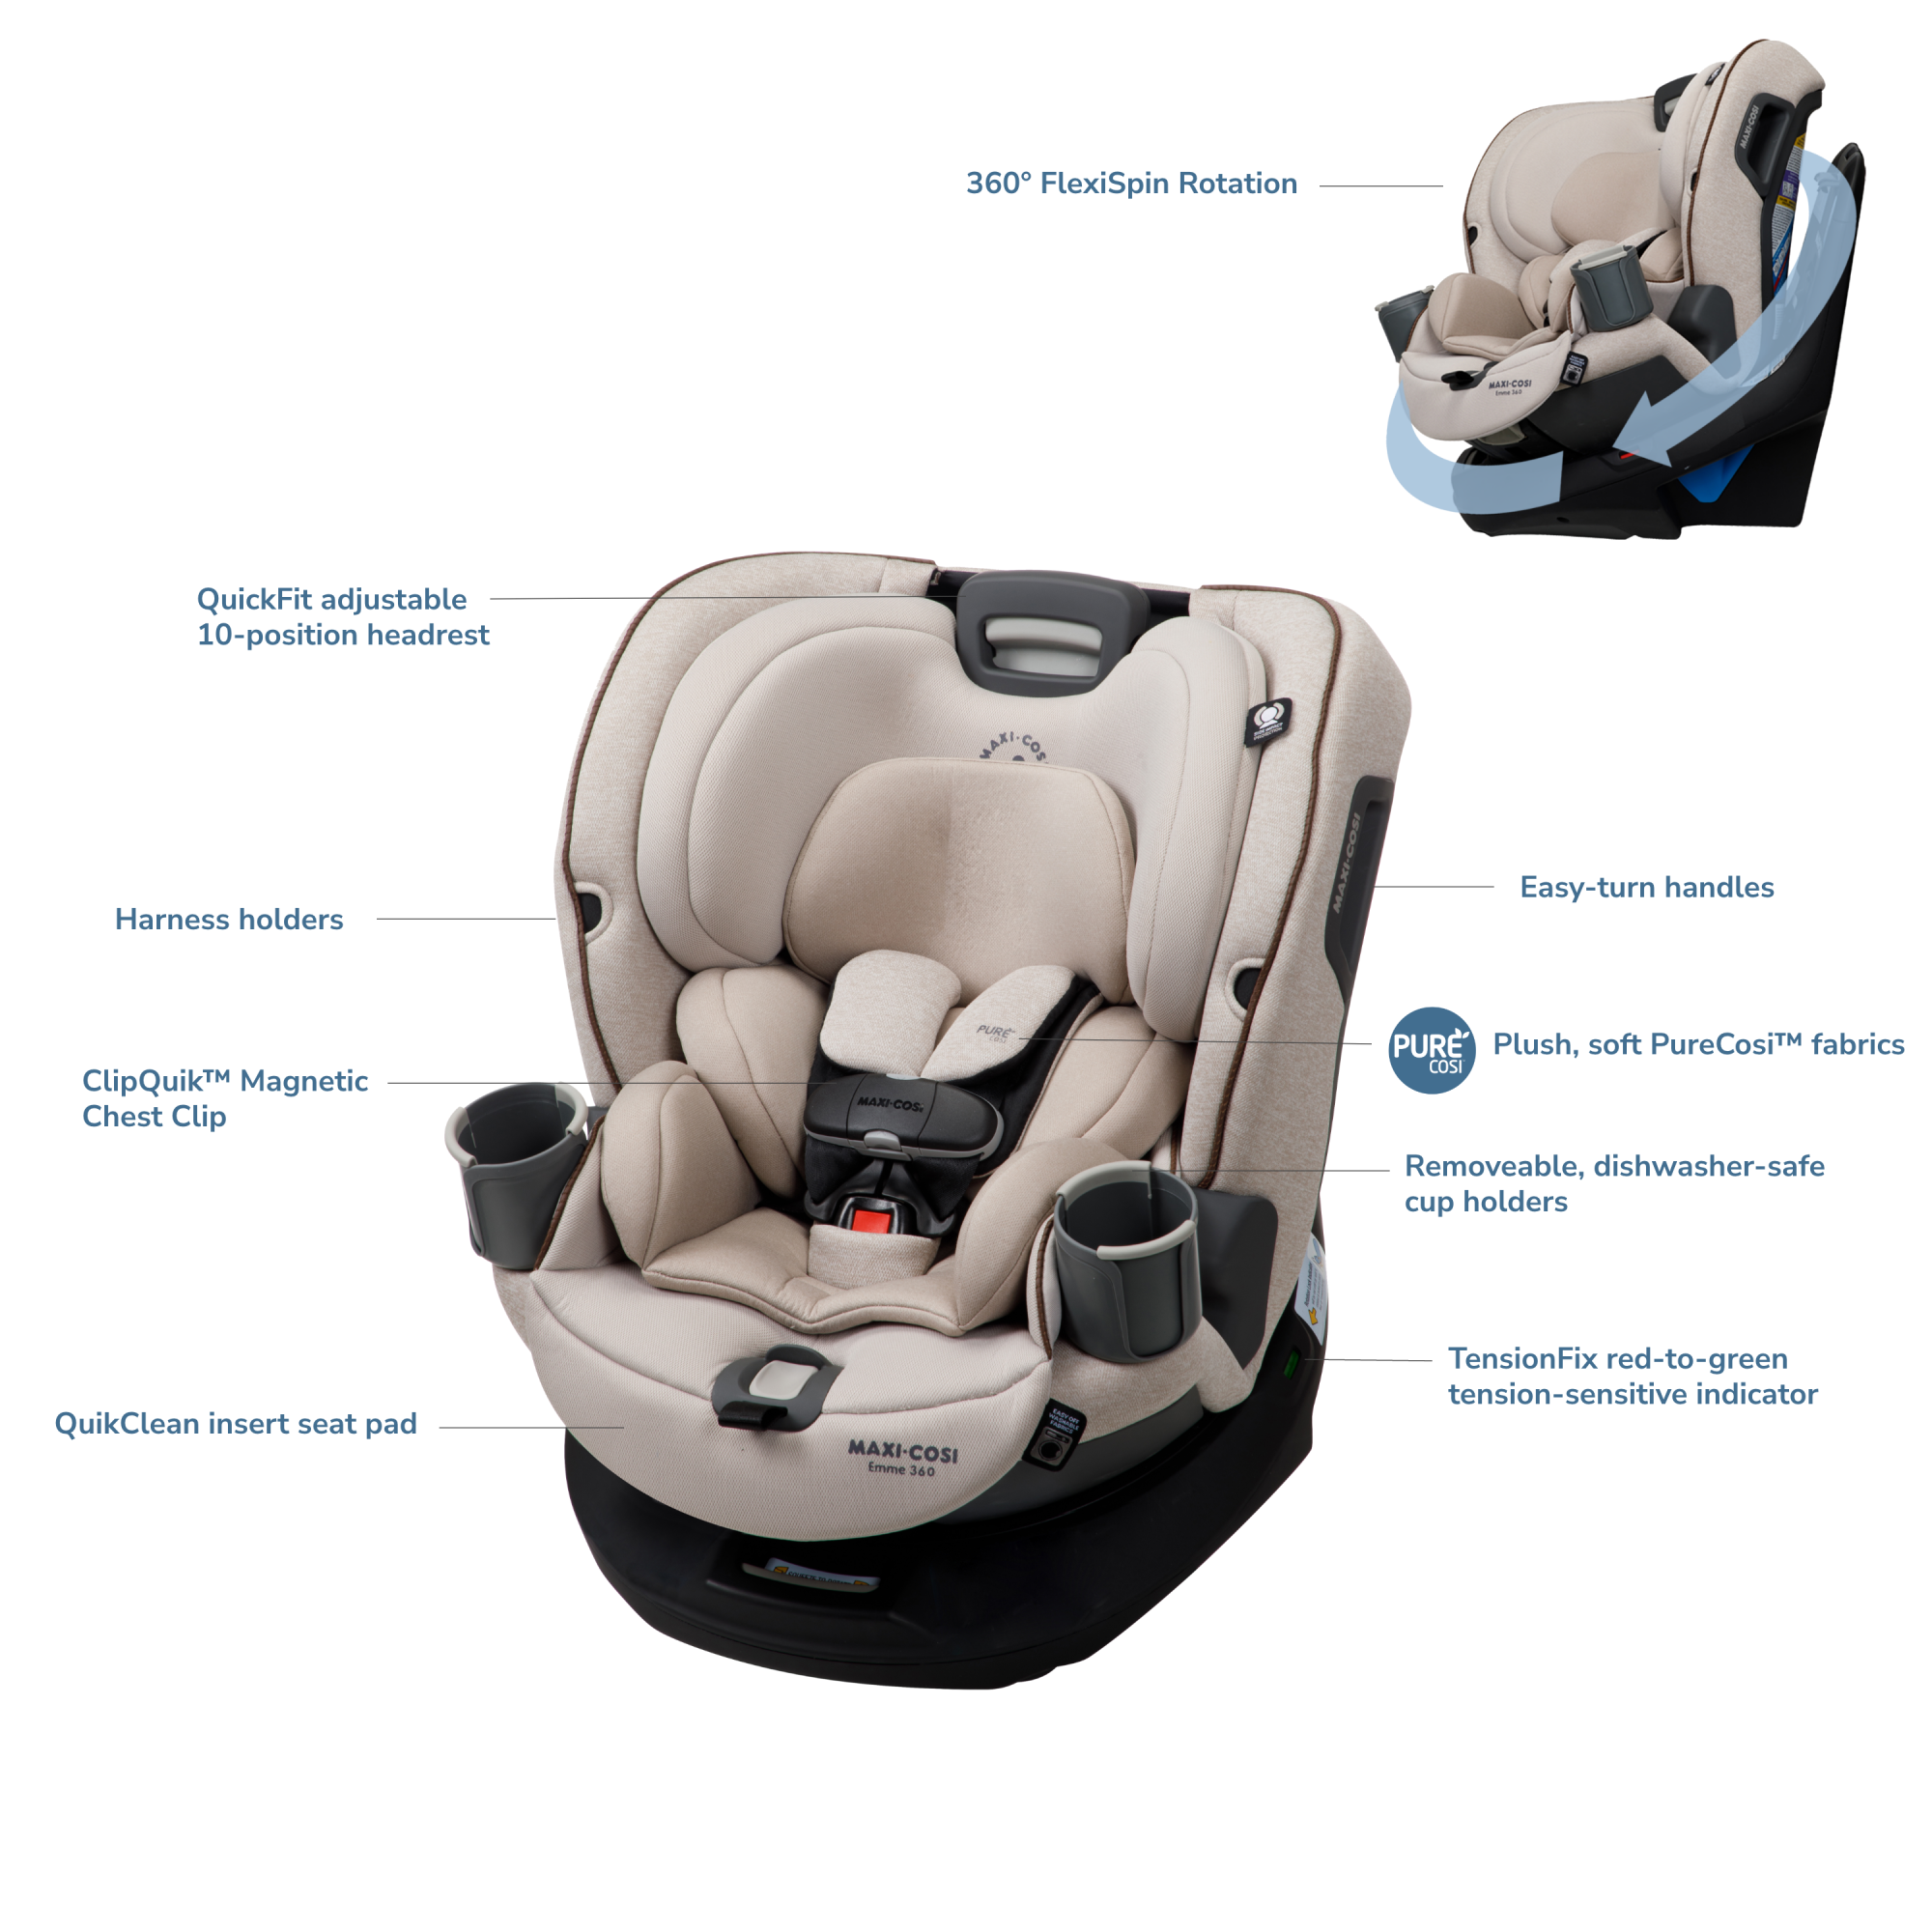 Emme 360™ Rotating All-in-One Convertible Car Seat - Desert Wonder - hotspot image showing all features